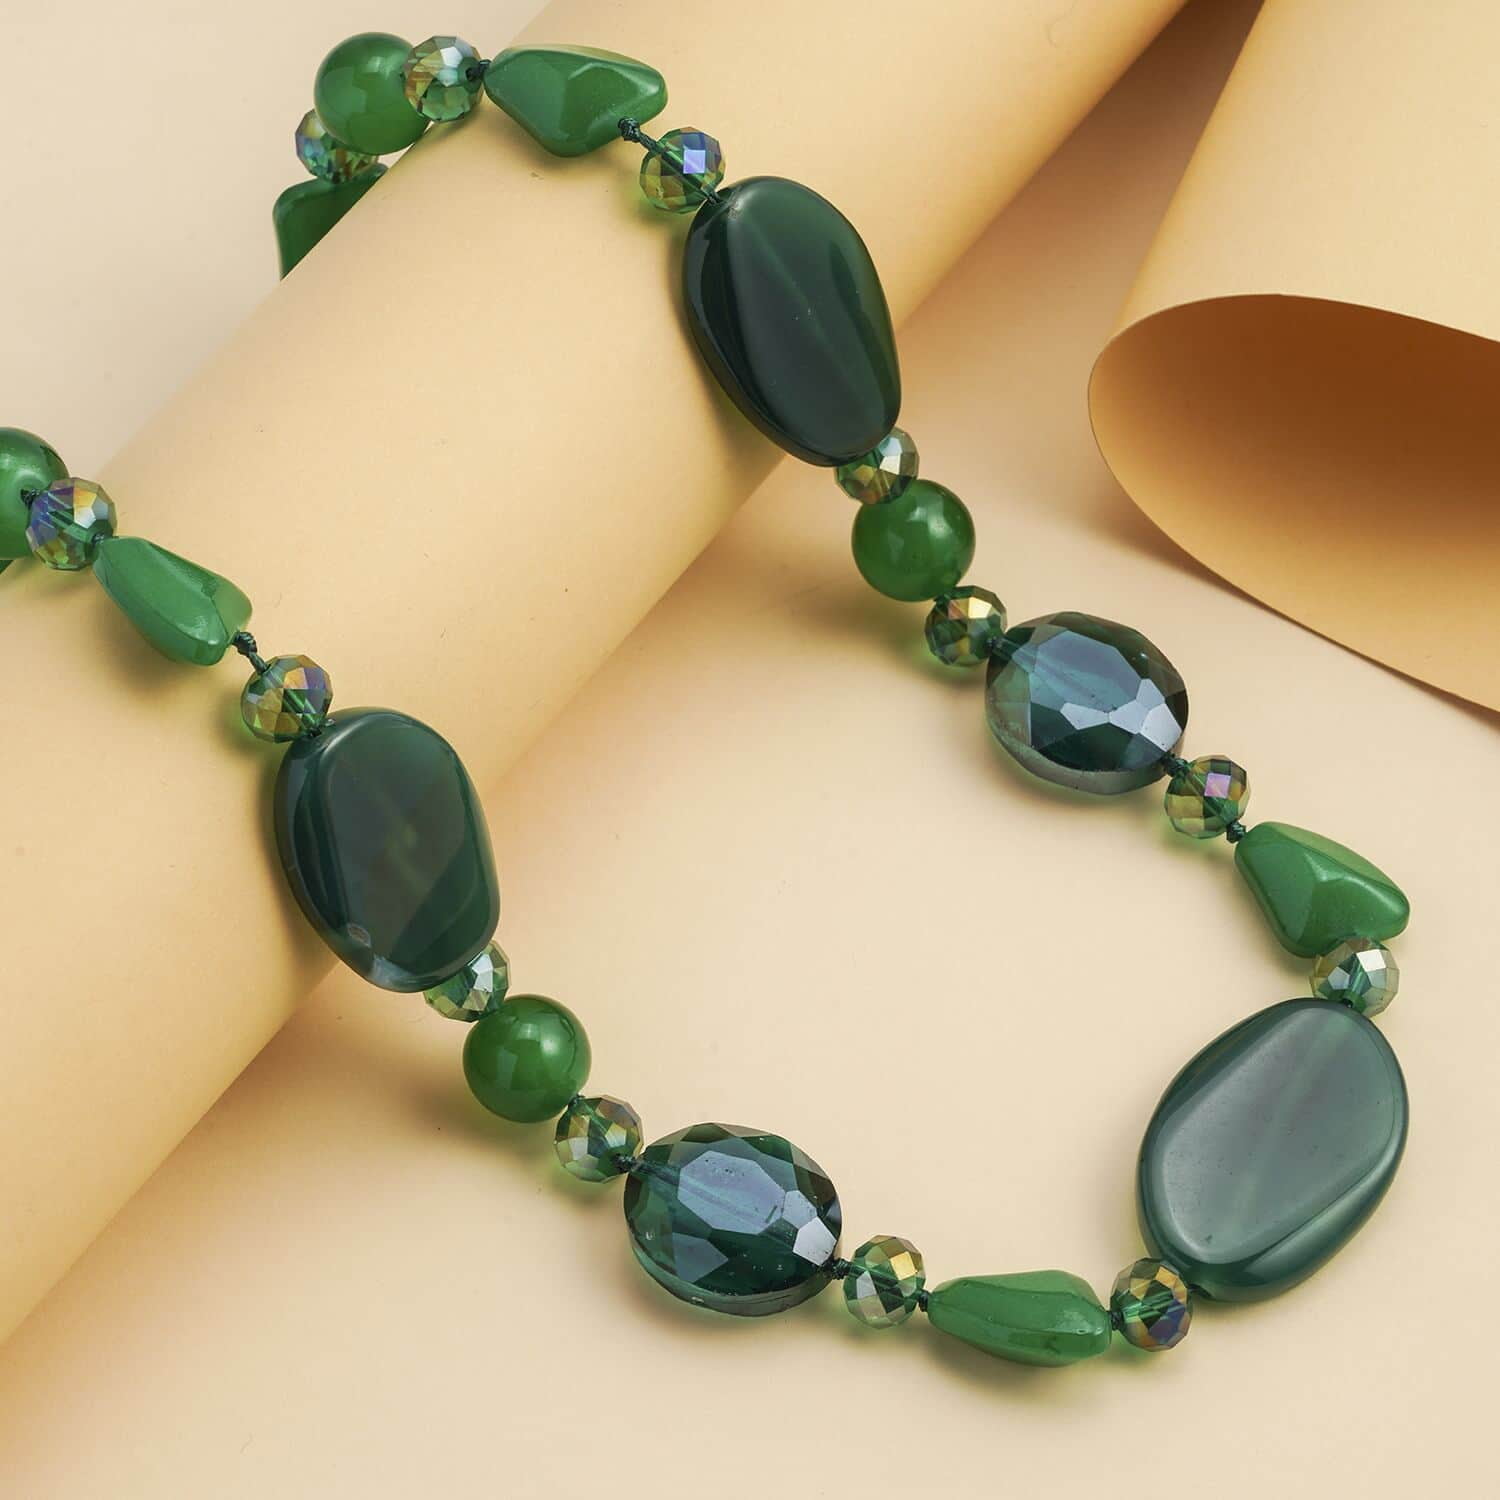 Green agate necklaces - Hyderabad Jewels And Pearls - 3918448